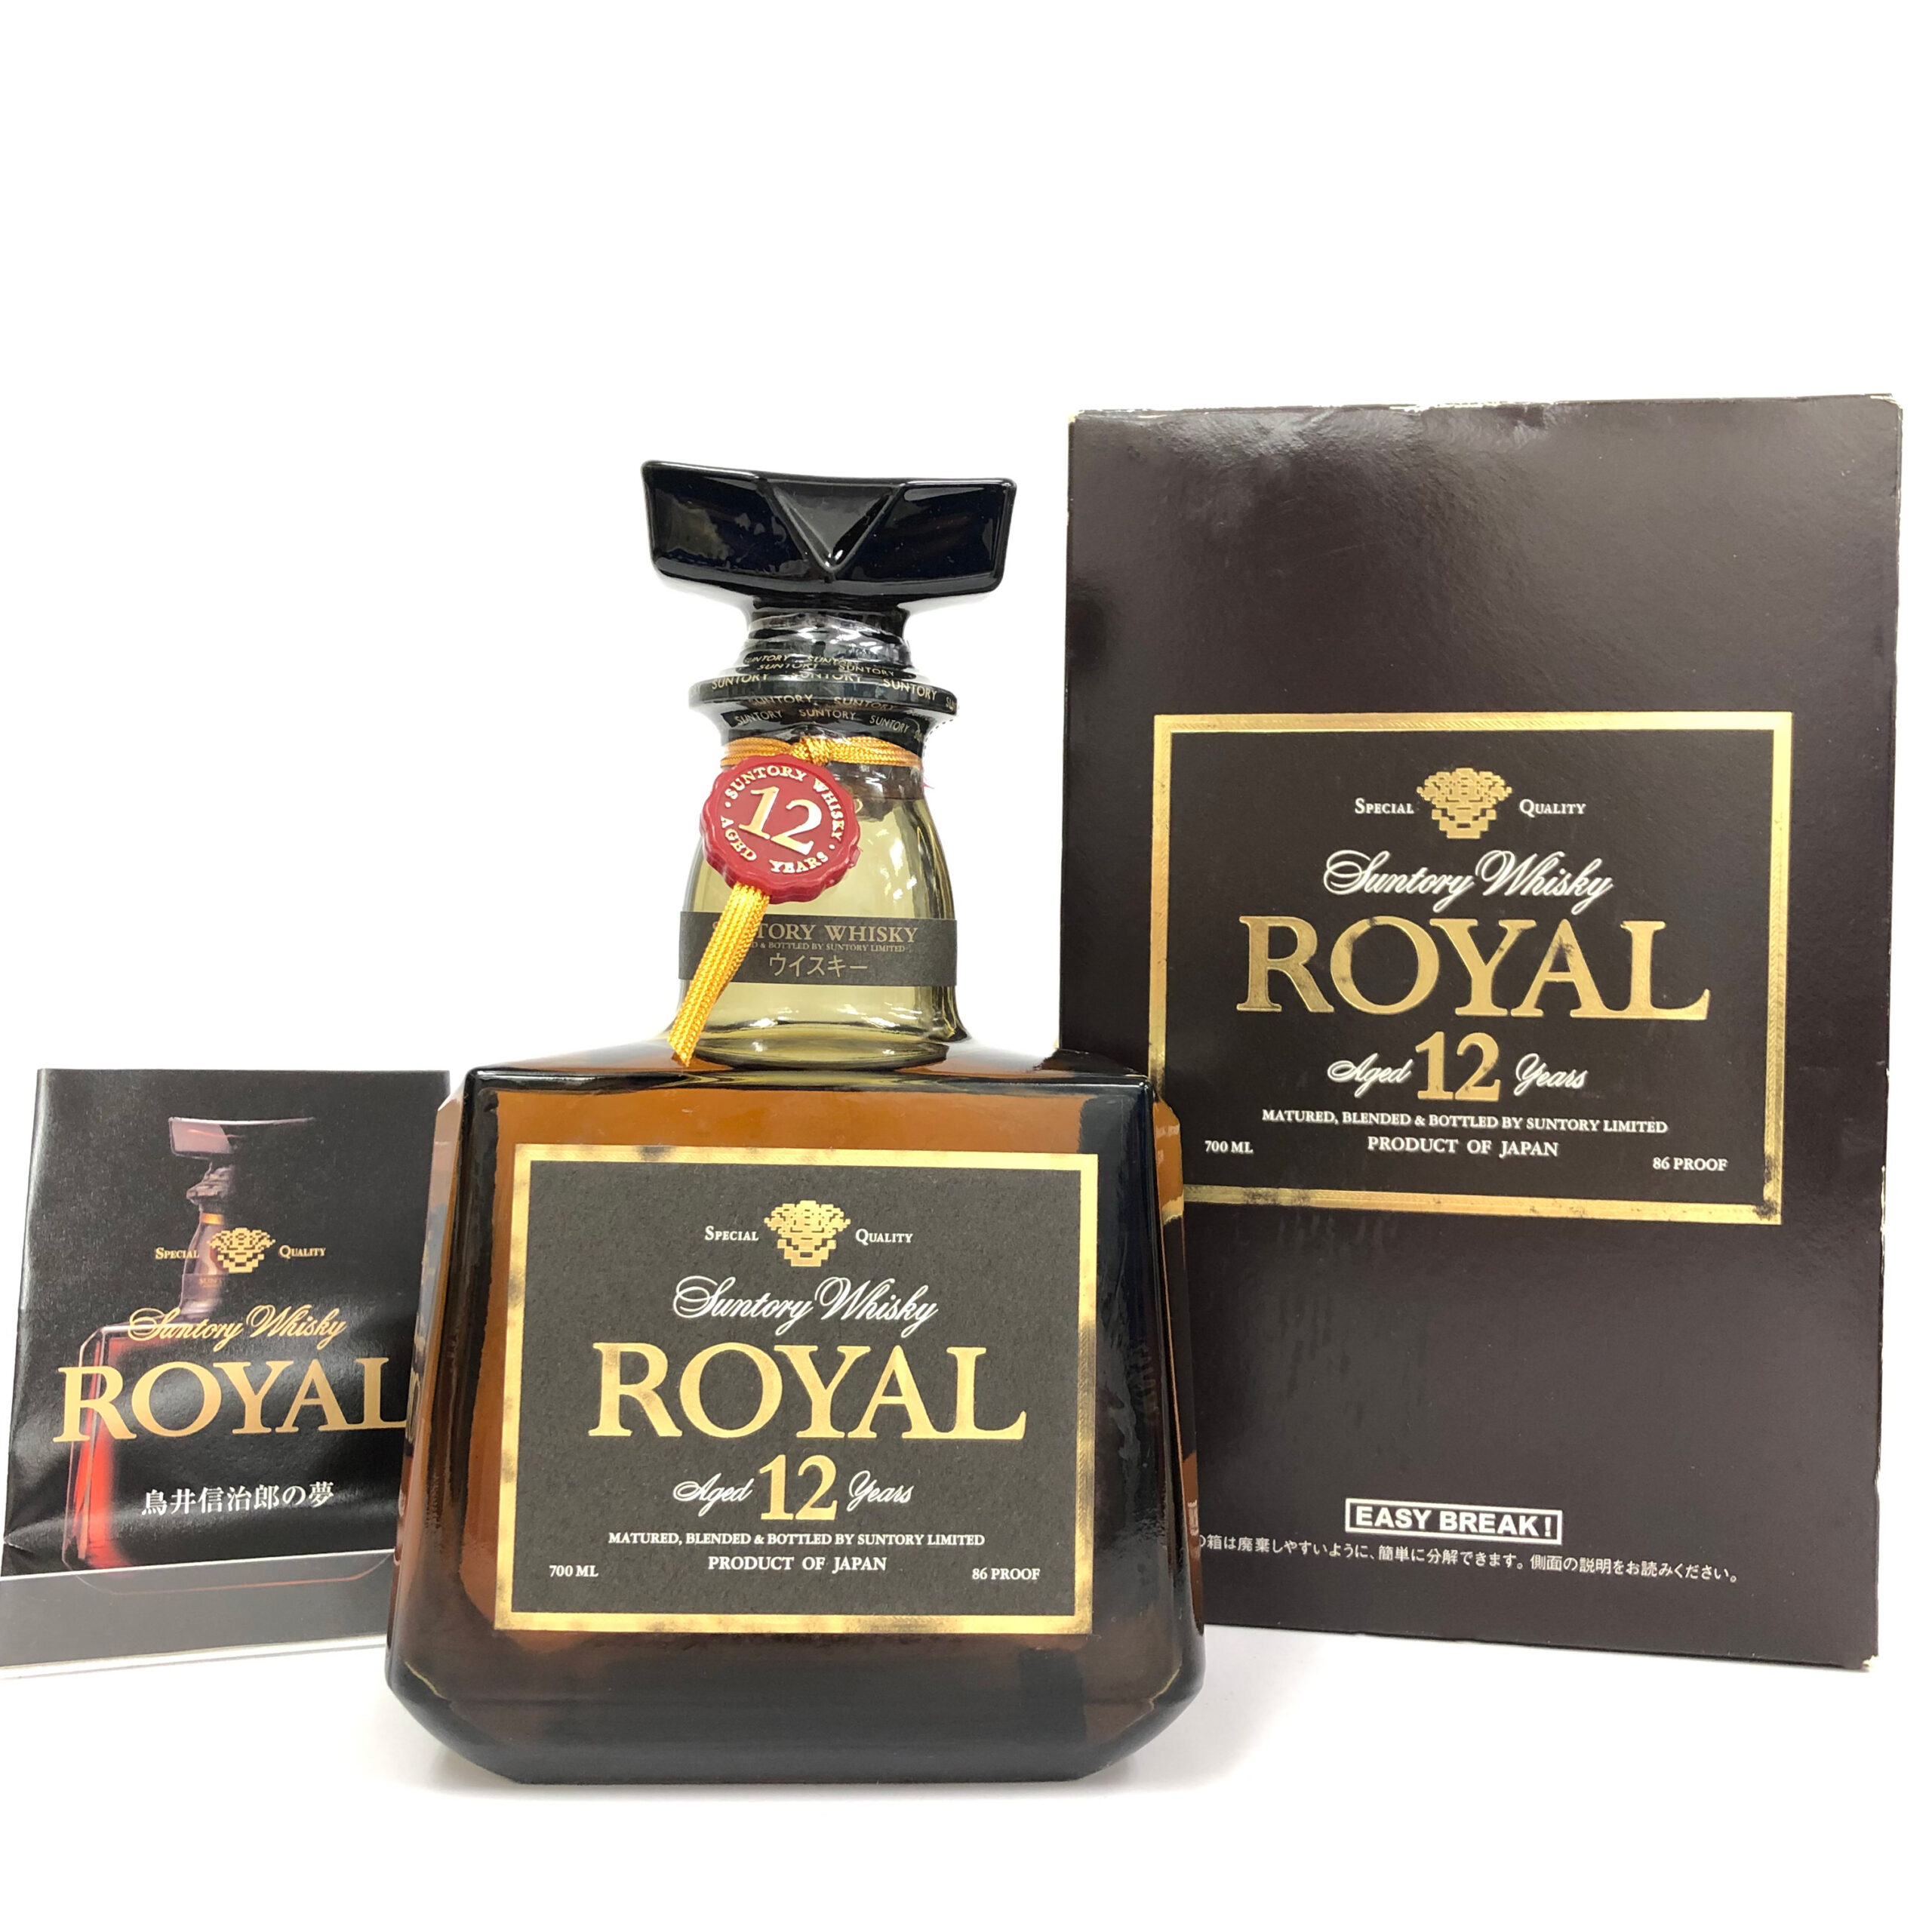 【Suntory Royal Series】「ROYAL 12year Black Label.」Launched in 1960 to mark “Suntory's 60th anniversary”. The distinctive bottle shape resembles the right part of the Chinese character for '酒' (means liquor), '酉', which is the tenth 'bird' in the “Chinese zodiac” (the number representing the year and direction). The shape of the stopper is also based on the bird gate of the shrine at the back of the Yamazaki distillery, emphasizing the 'tory' in 'Suntory'.